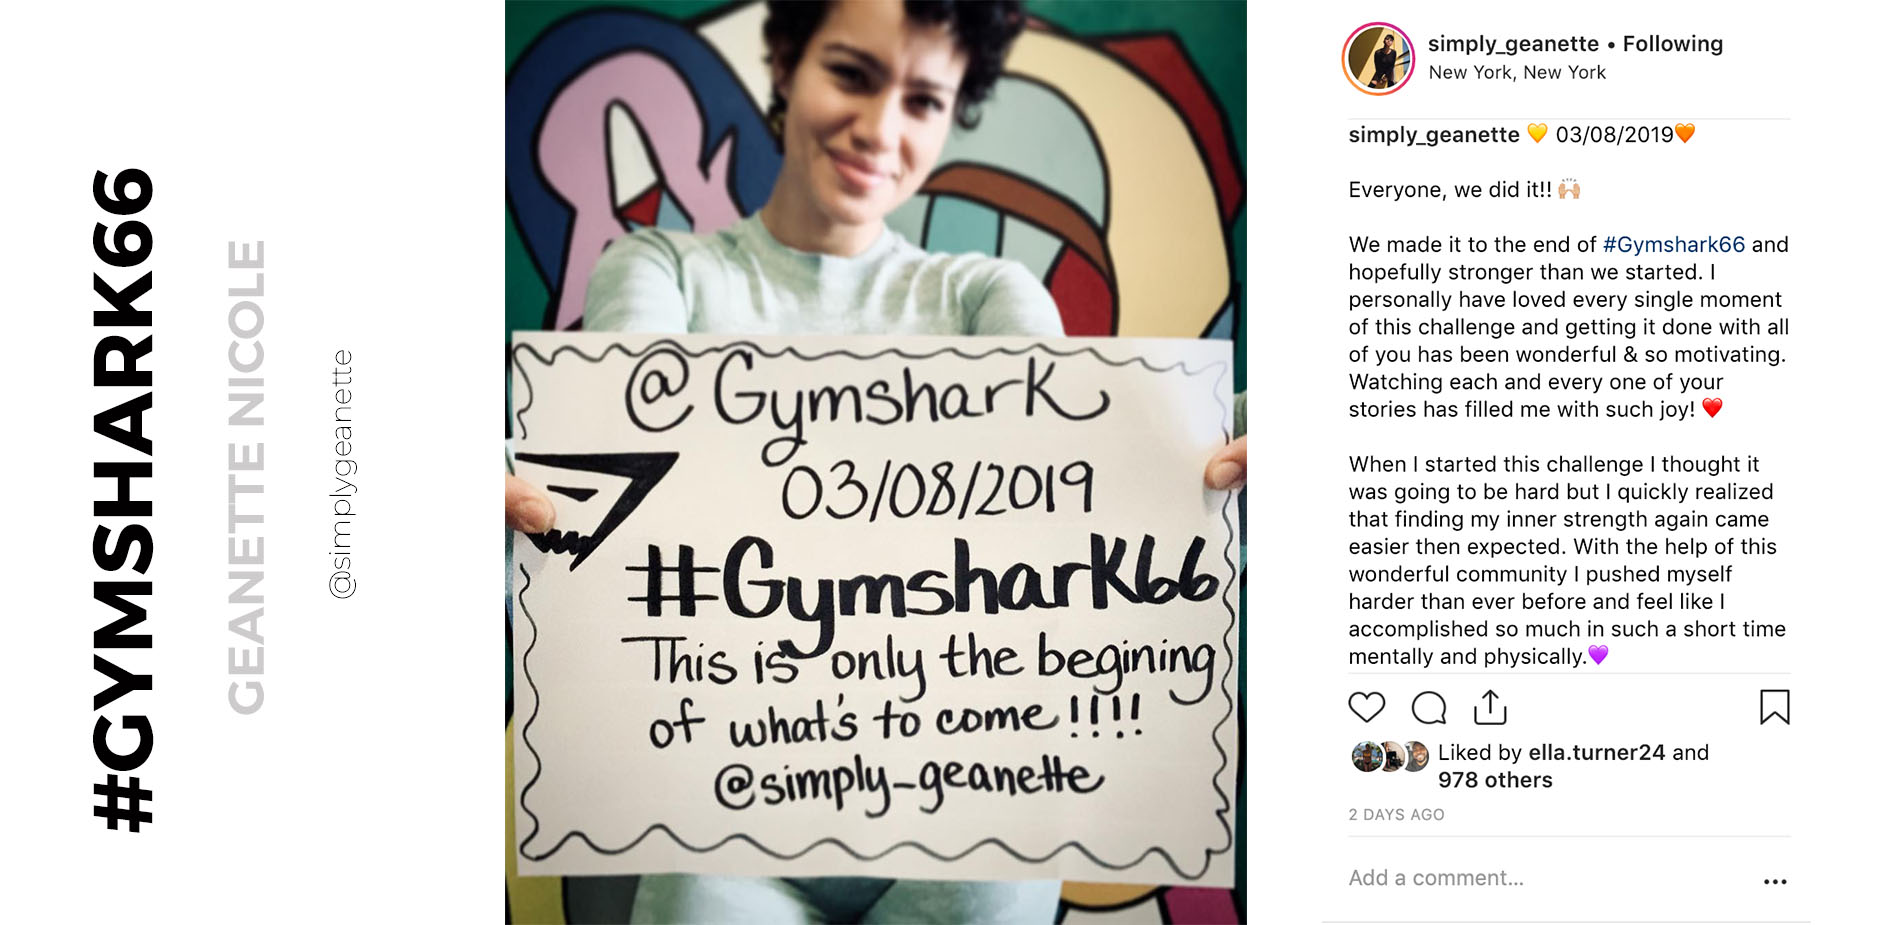 What Is #Gymshark66?